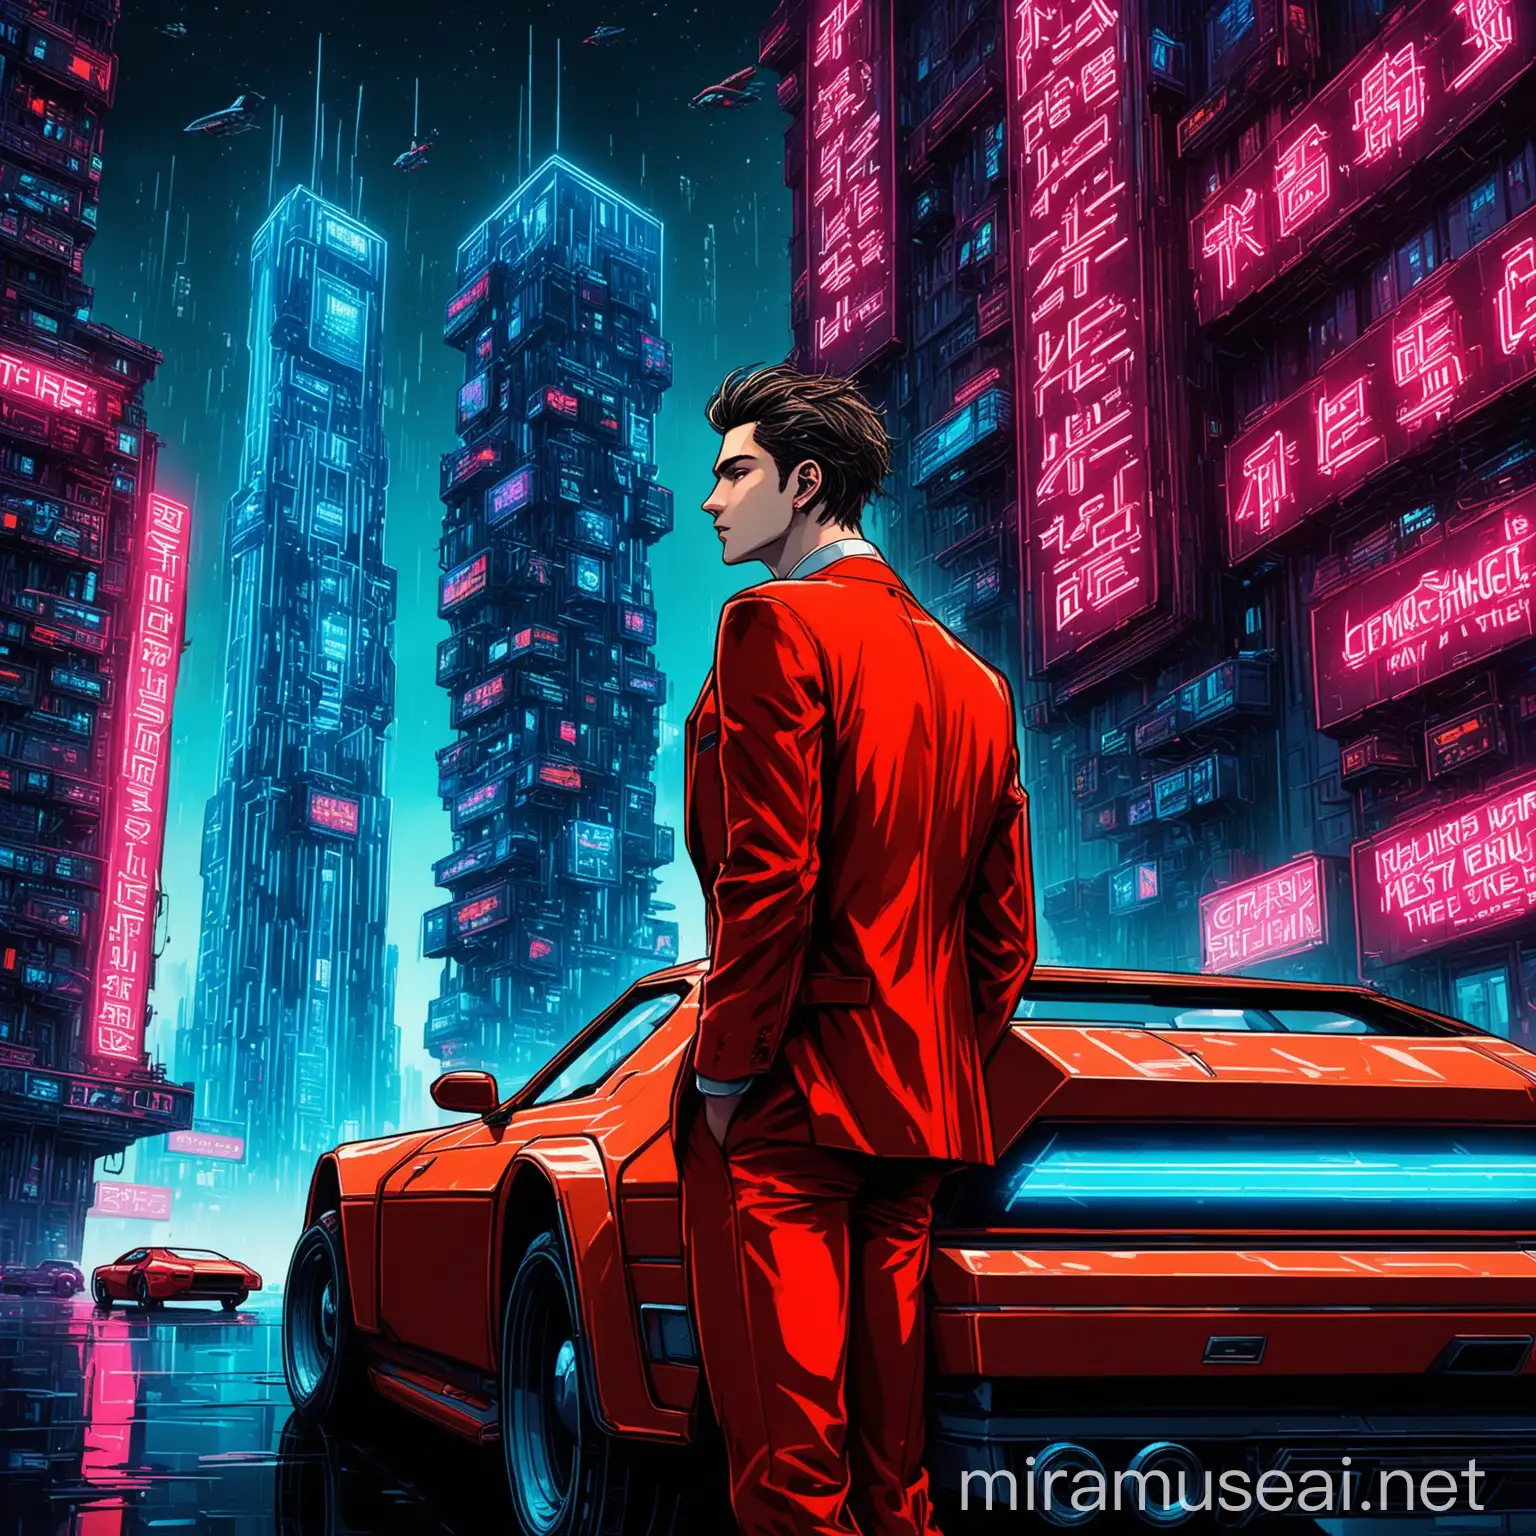 The background is the future world of cyberpunk dystopia.
It's midnight and the building is full of neon signs.
Two cars are flying in the sky.
A handsome man in his 20s looks out the window of a high-rise building.
A handsome man in his 20s is wearing a red suit set.